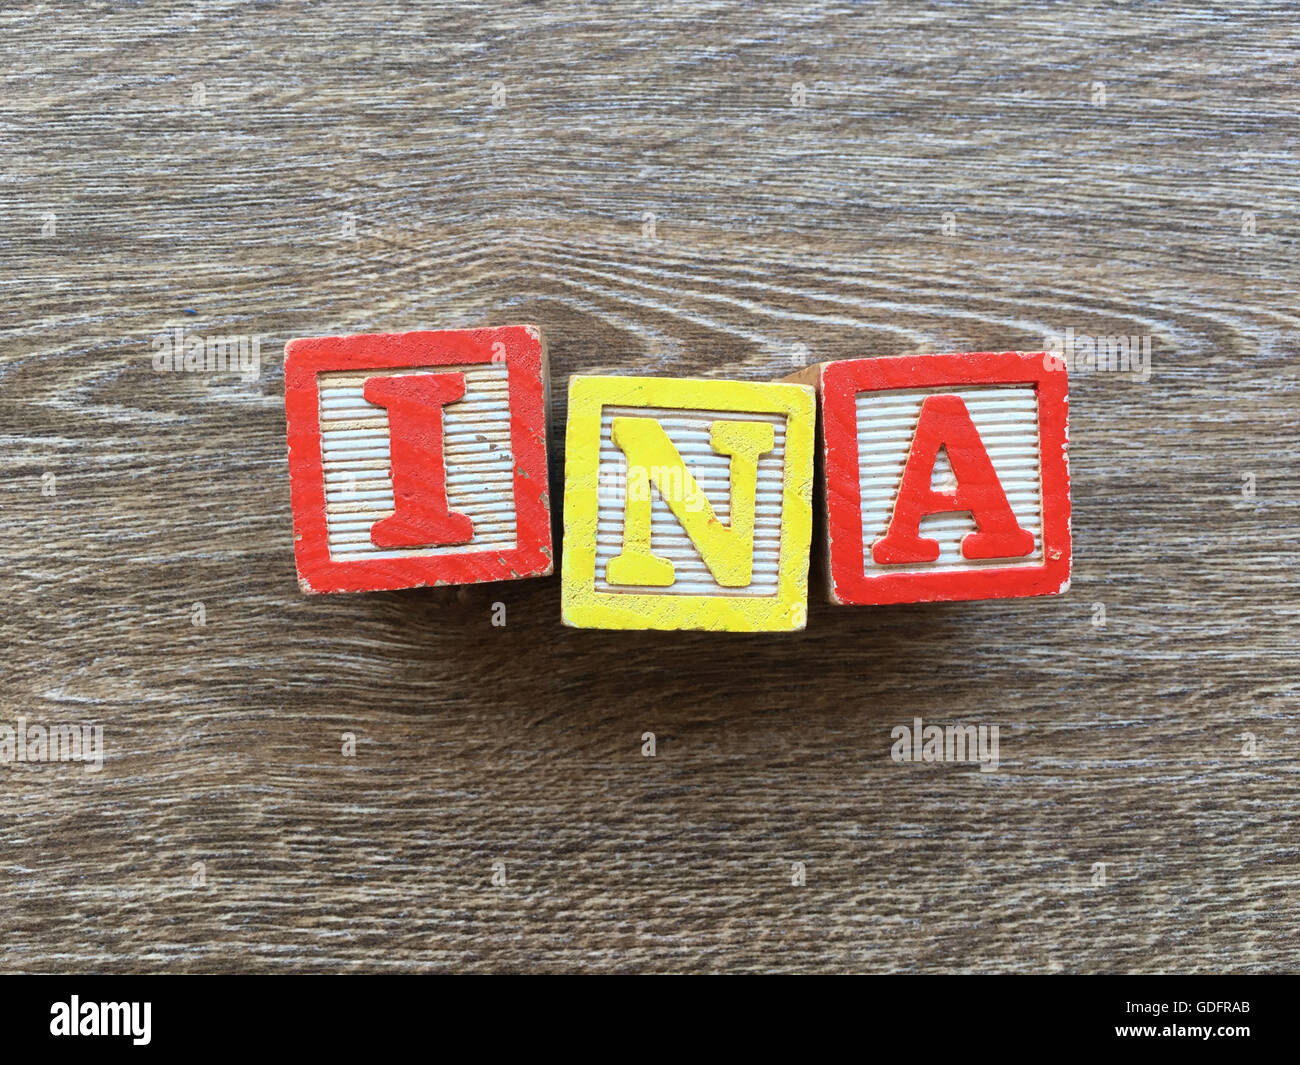 Ina name written with wood block letter toys Stock Photo